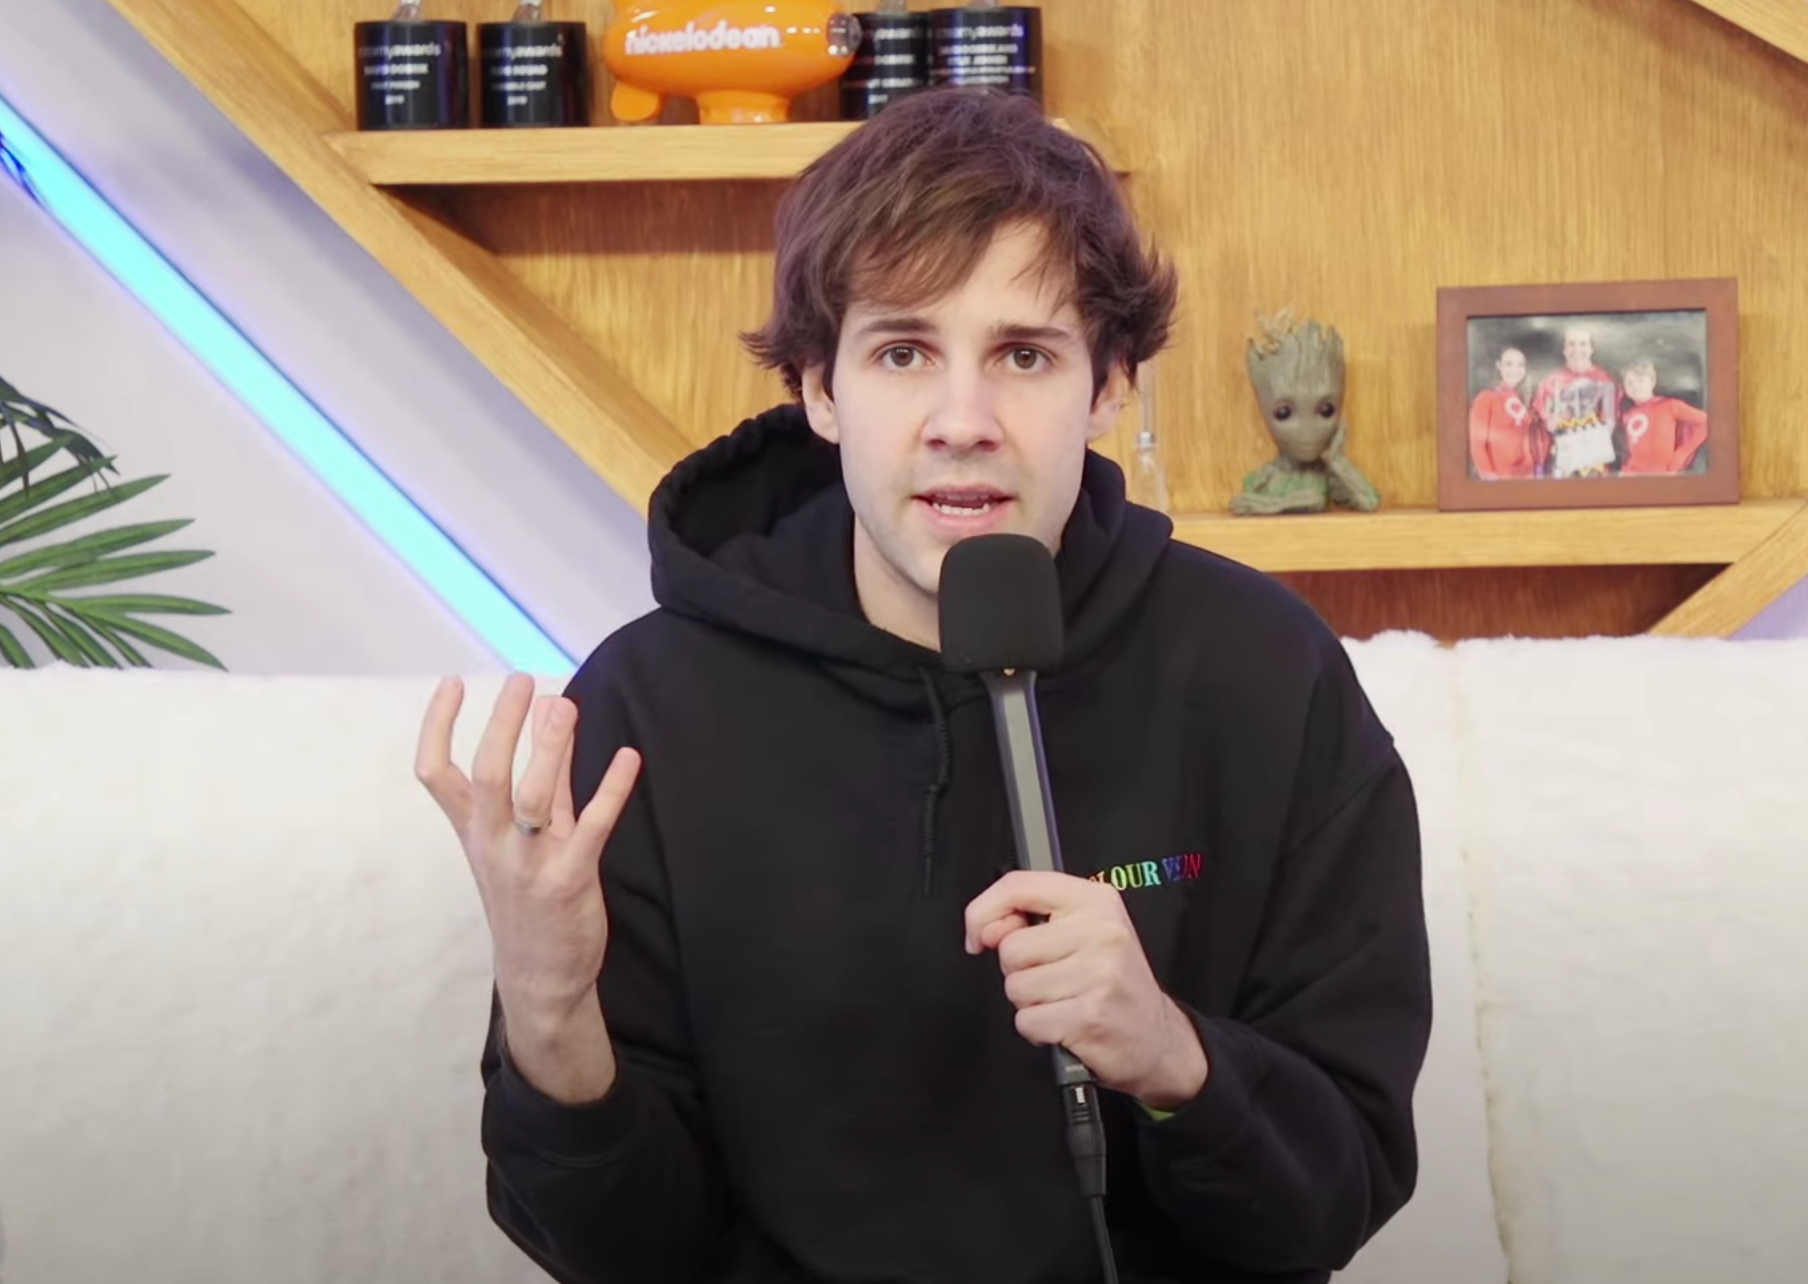 Who is David Dobrik - YouTuber stepping down from buzzy app Dispo amid controversy